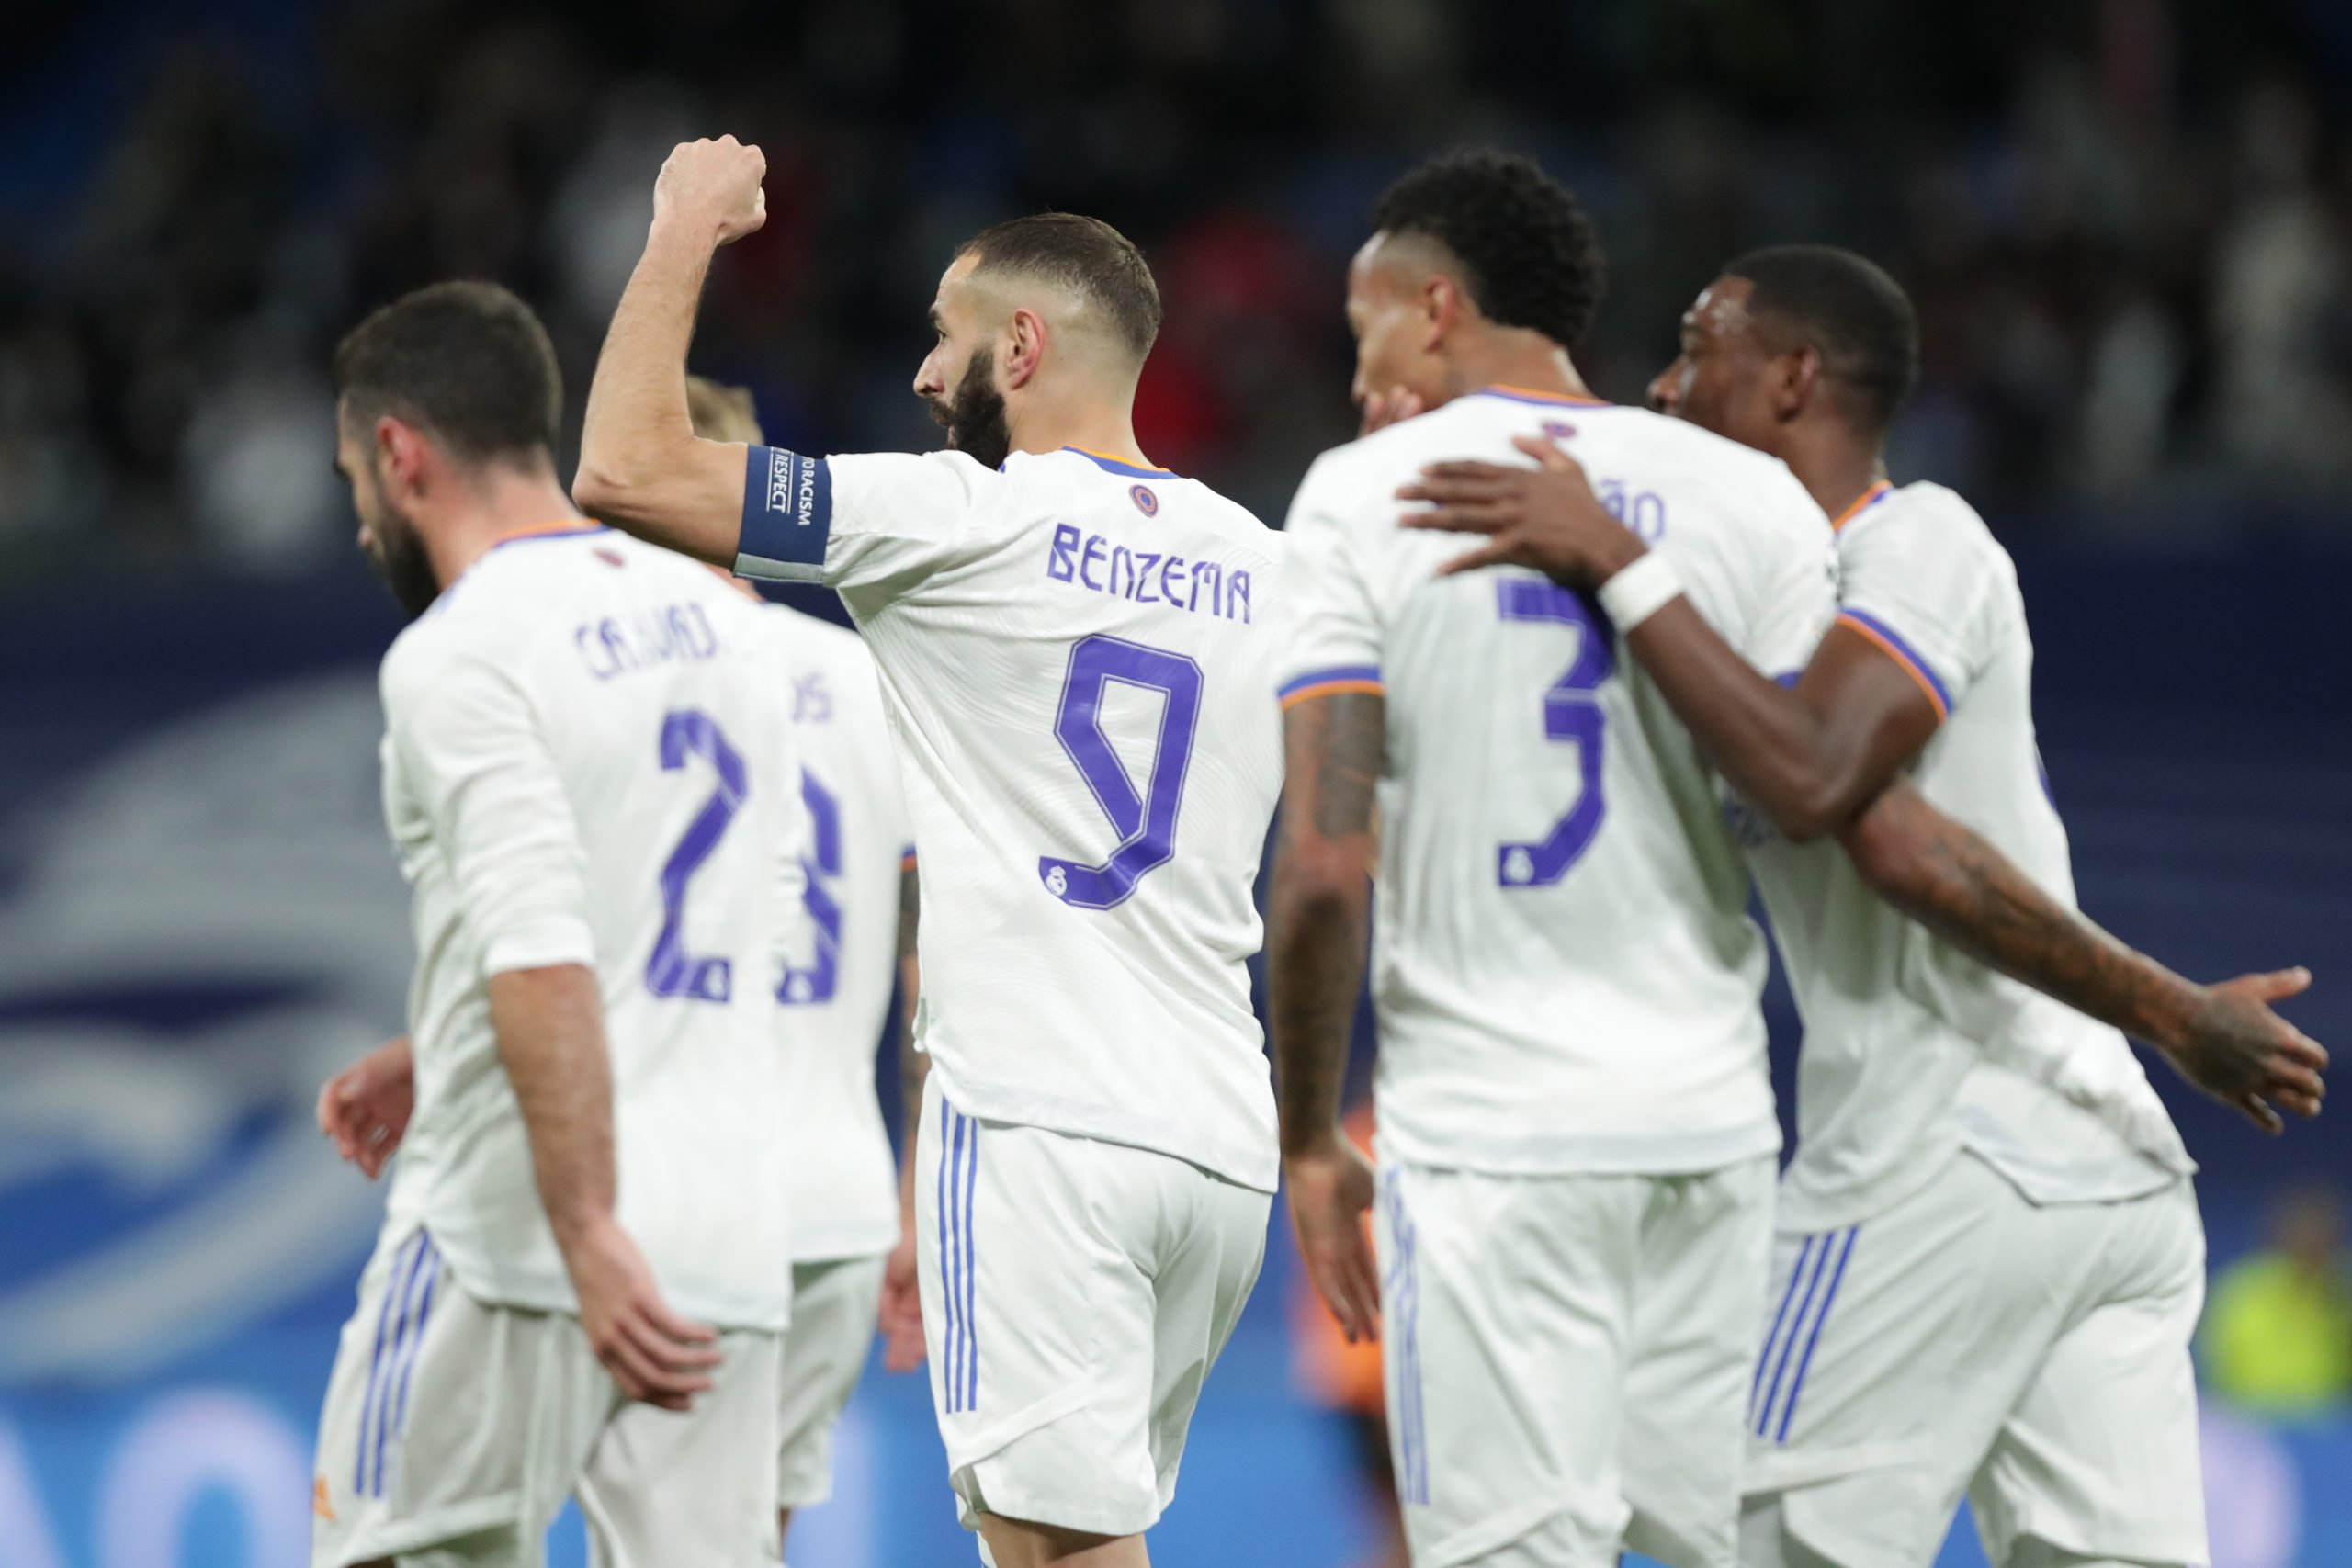 MADRID, SPAIN - NOVEMBER 03: Karim Benzema (2ndL) of Real Madrid CF celebrates scoring their opening goal with teammates during the UEFA Champions League group D match between Real Madrid and Shakhtar Donetsk at Estadio Santiago Bernabeu on November 03, 2021 in Madrid, Spain. (Photo by Gonzalo Arroyo Moreno/Getty Images)
The 4th Official uses images provided by the following image agency:
Getty Images (https://www.gettyimages.de/)
Imago Images (https://www.imago-images.de/)